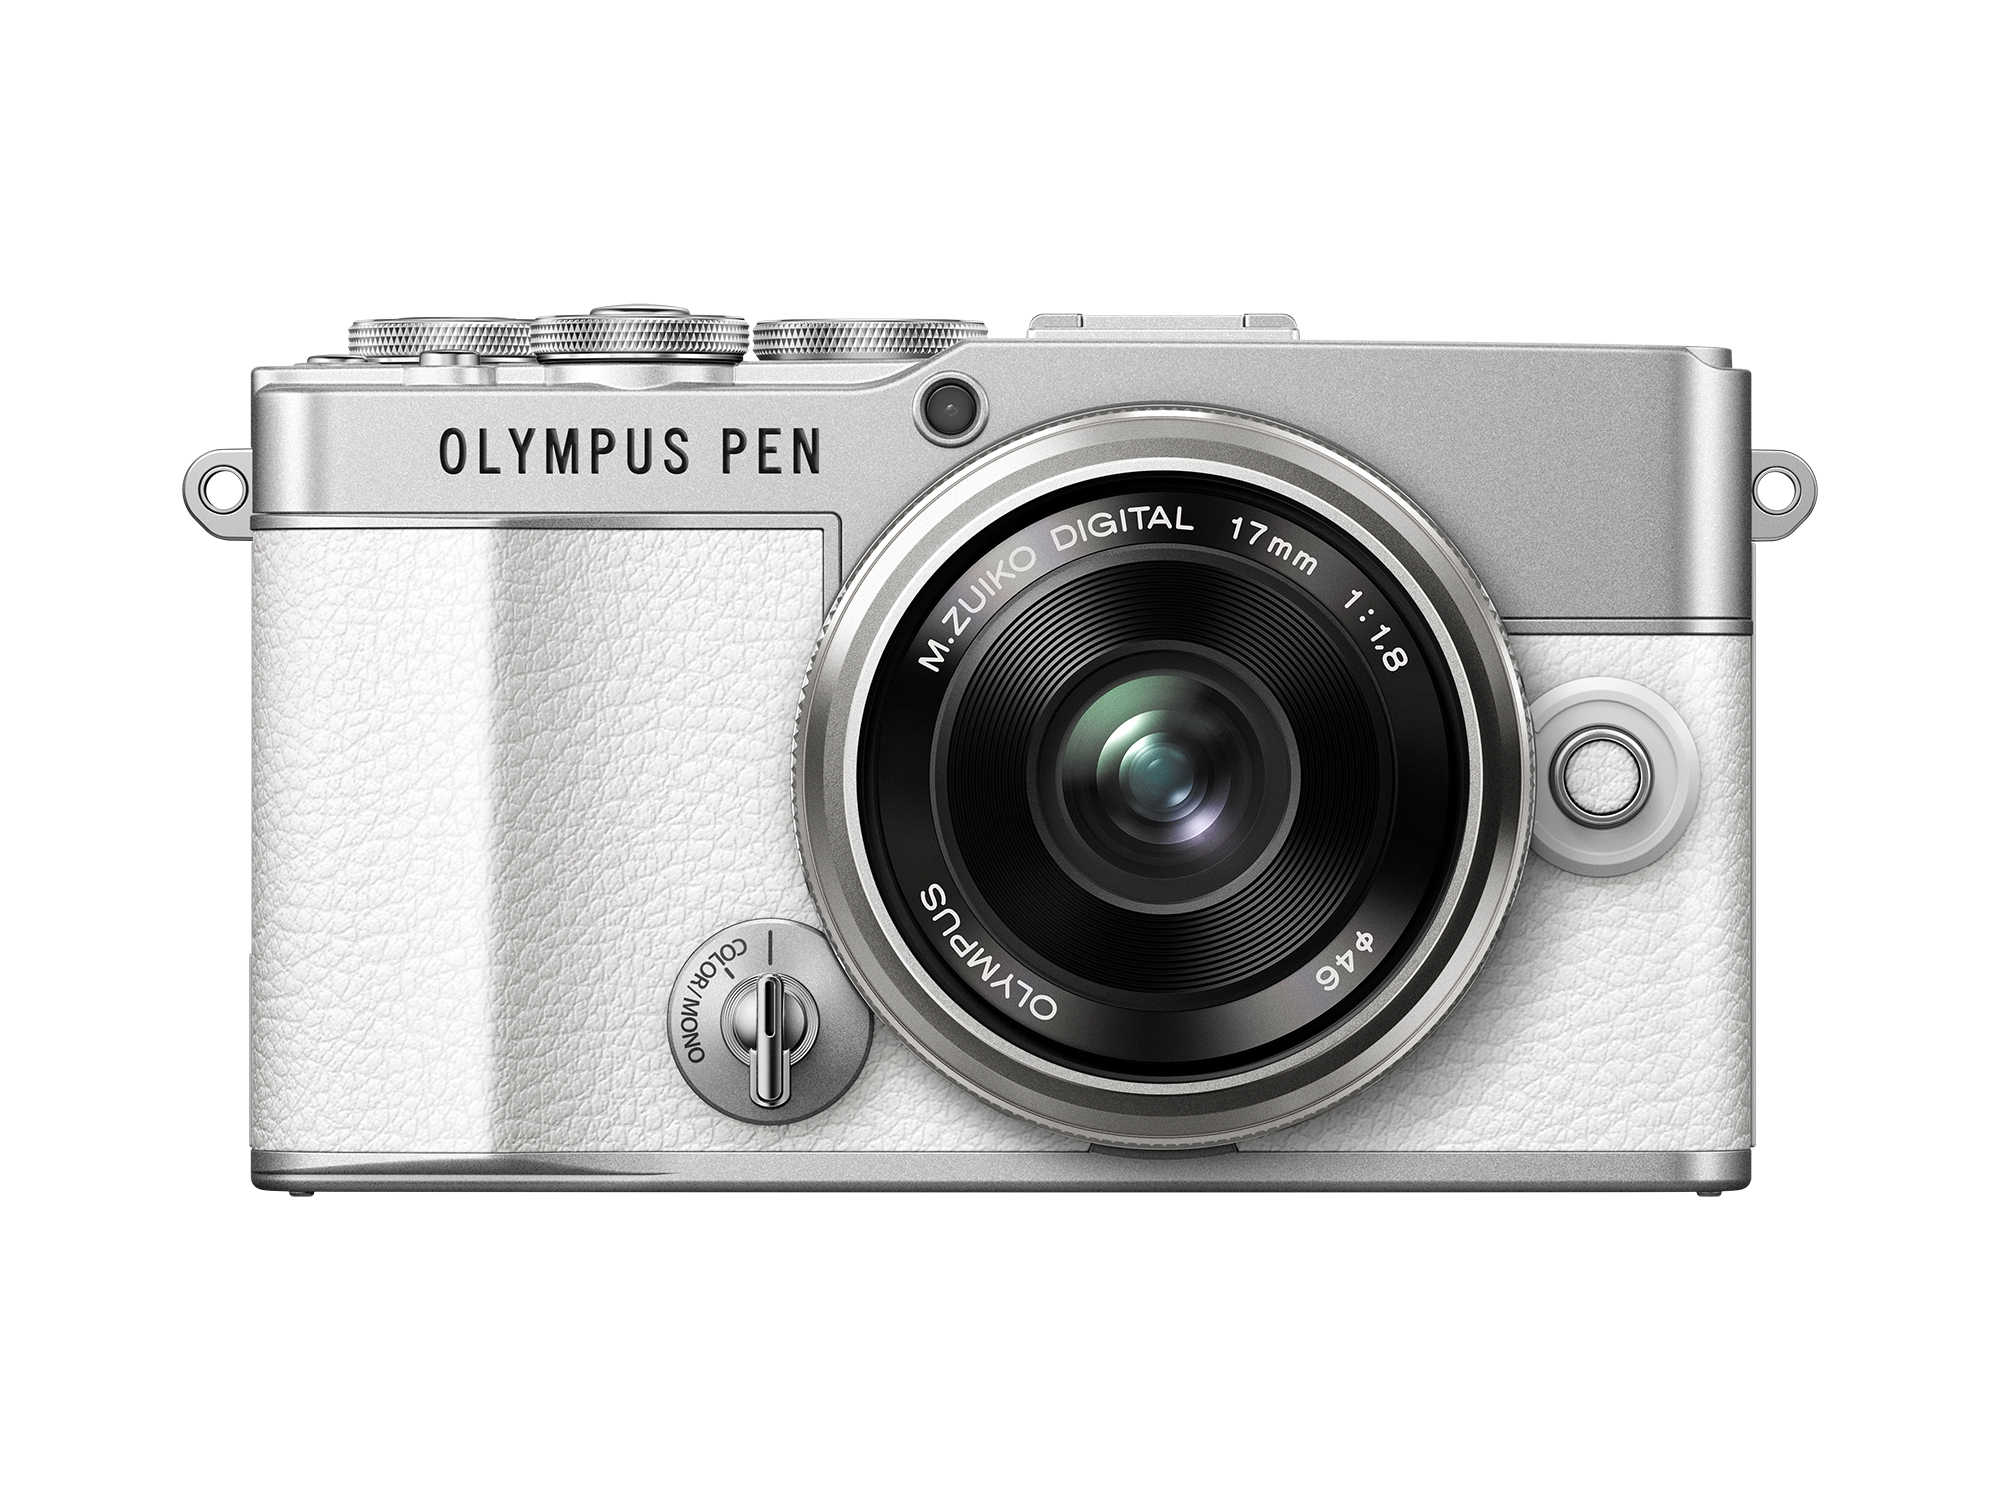 The Olympus is The Beautiful Camera They've Made in a While